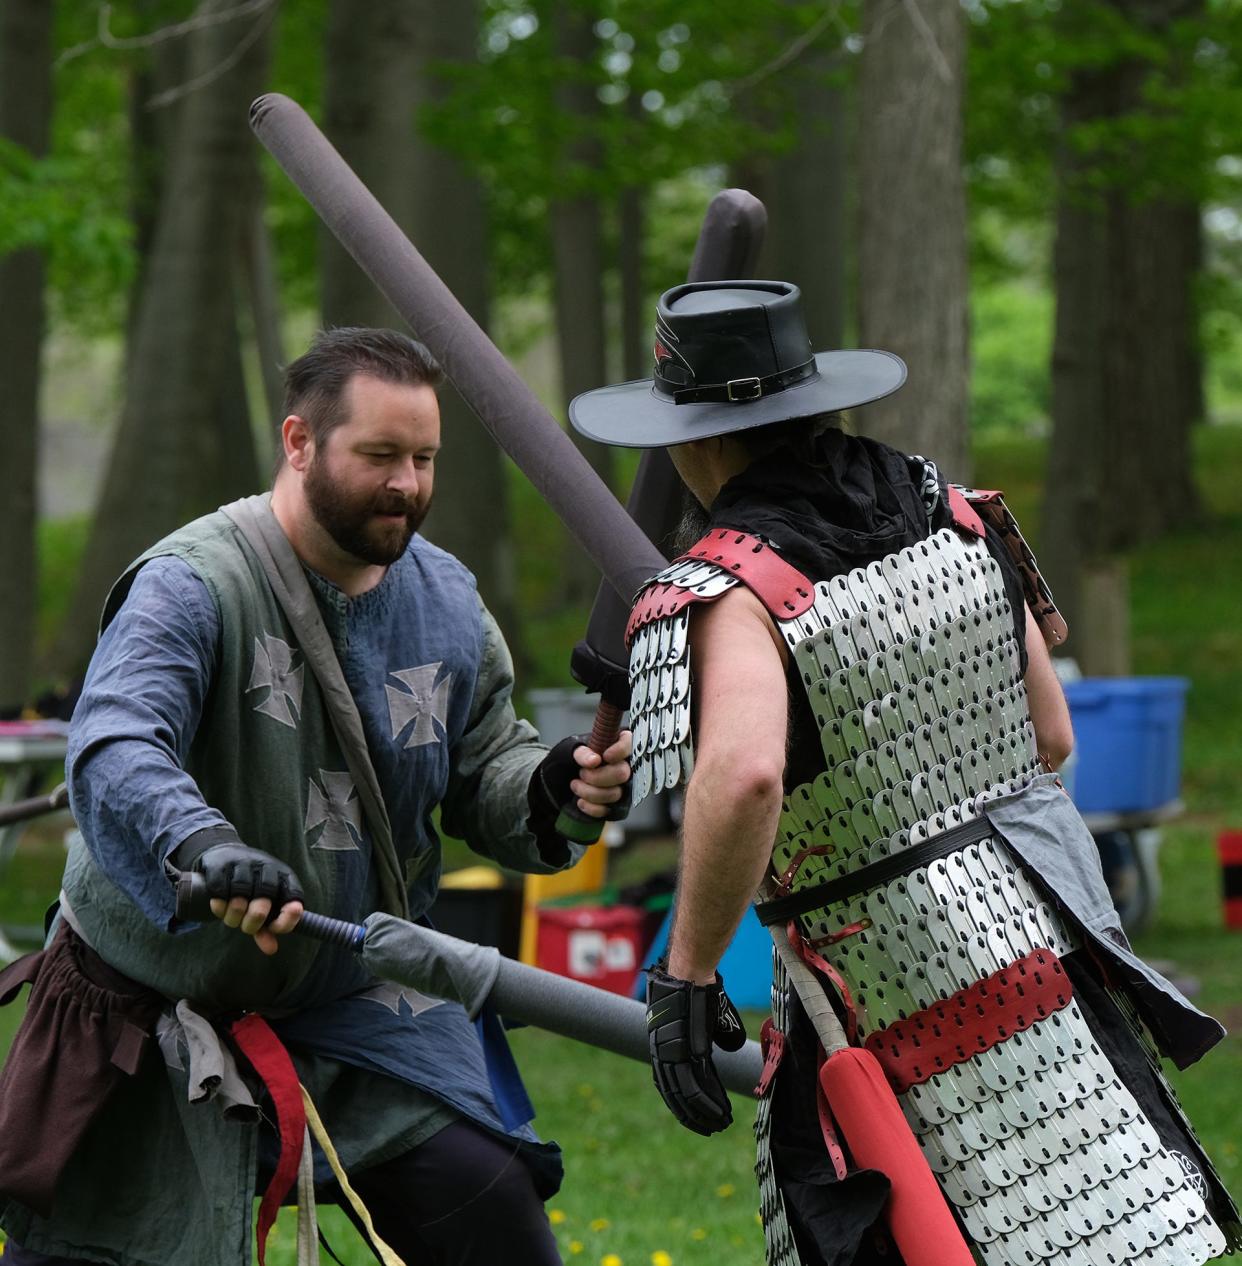 Members of the Ashen Hills community clash with foam weapons and engage in a role-playing fantasy game called Amtgard every Sunday in Partriarche Park in East Lansing Sunday, May 15, 2022. The community is about 30 to 35 members strong and is open to newcomers who want to try it out. All of the costumes and weapons are handmade and are carefully inspected for safety before each match.